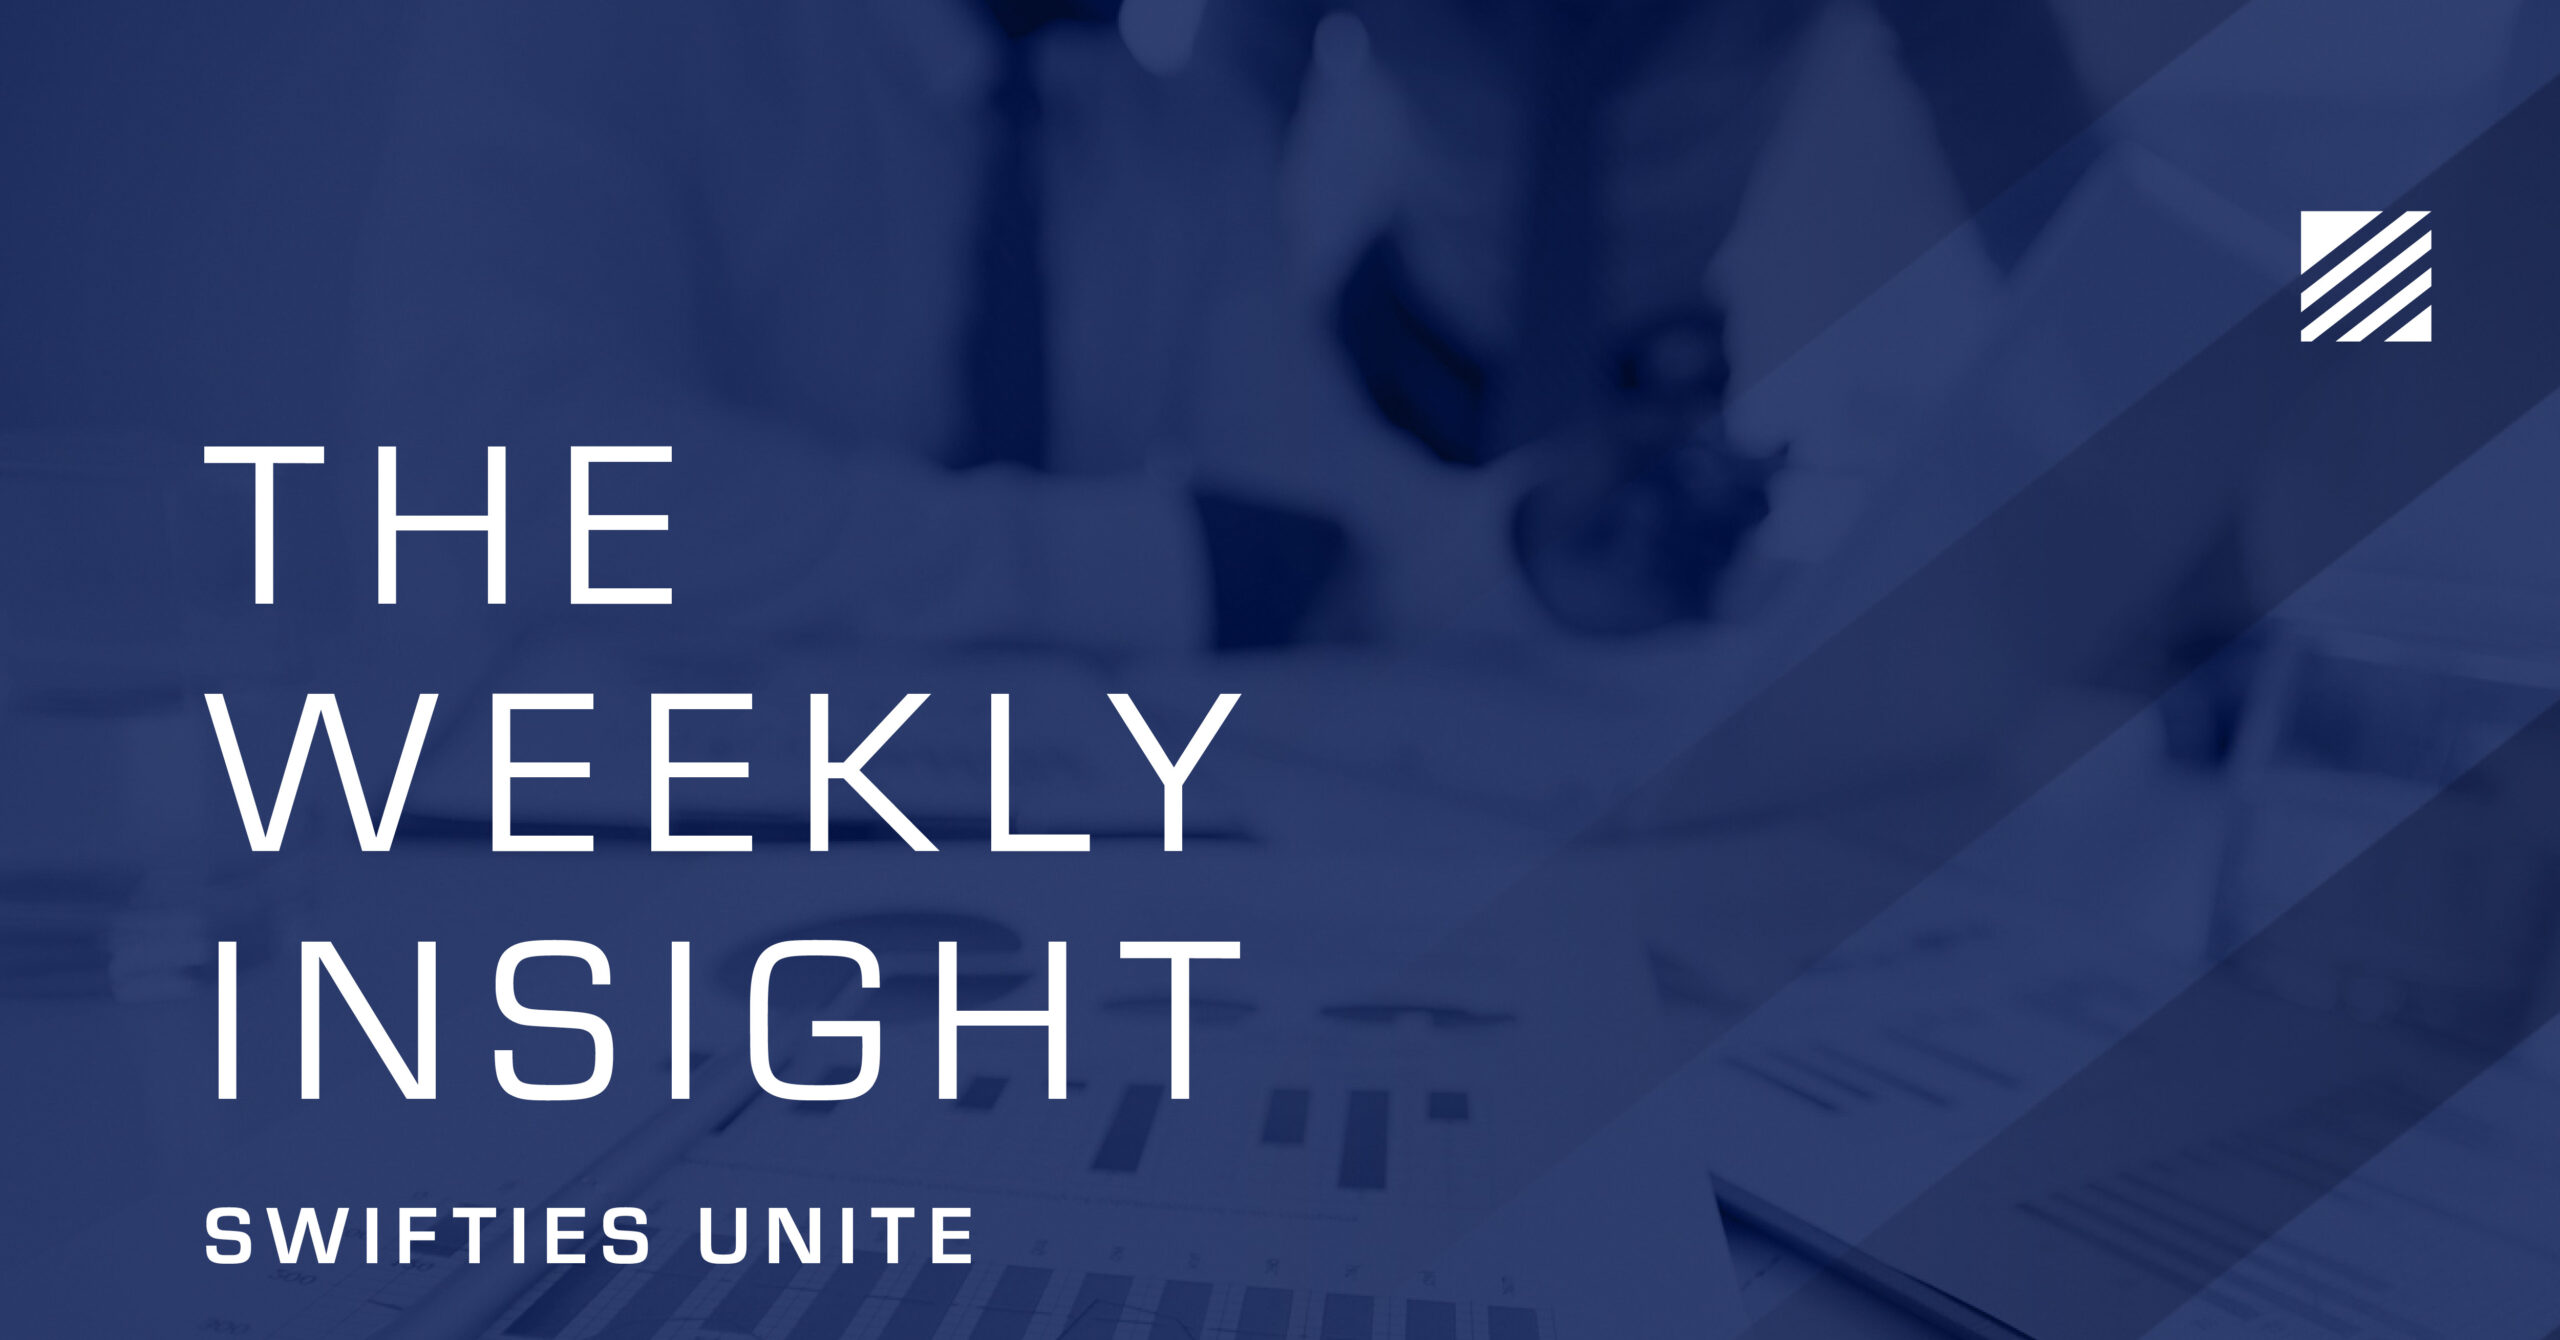 The Weekly Insight: Swifties Unite Graphic